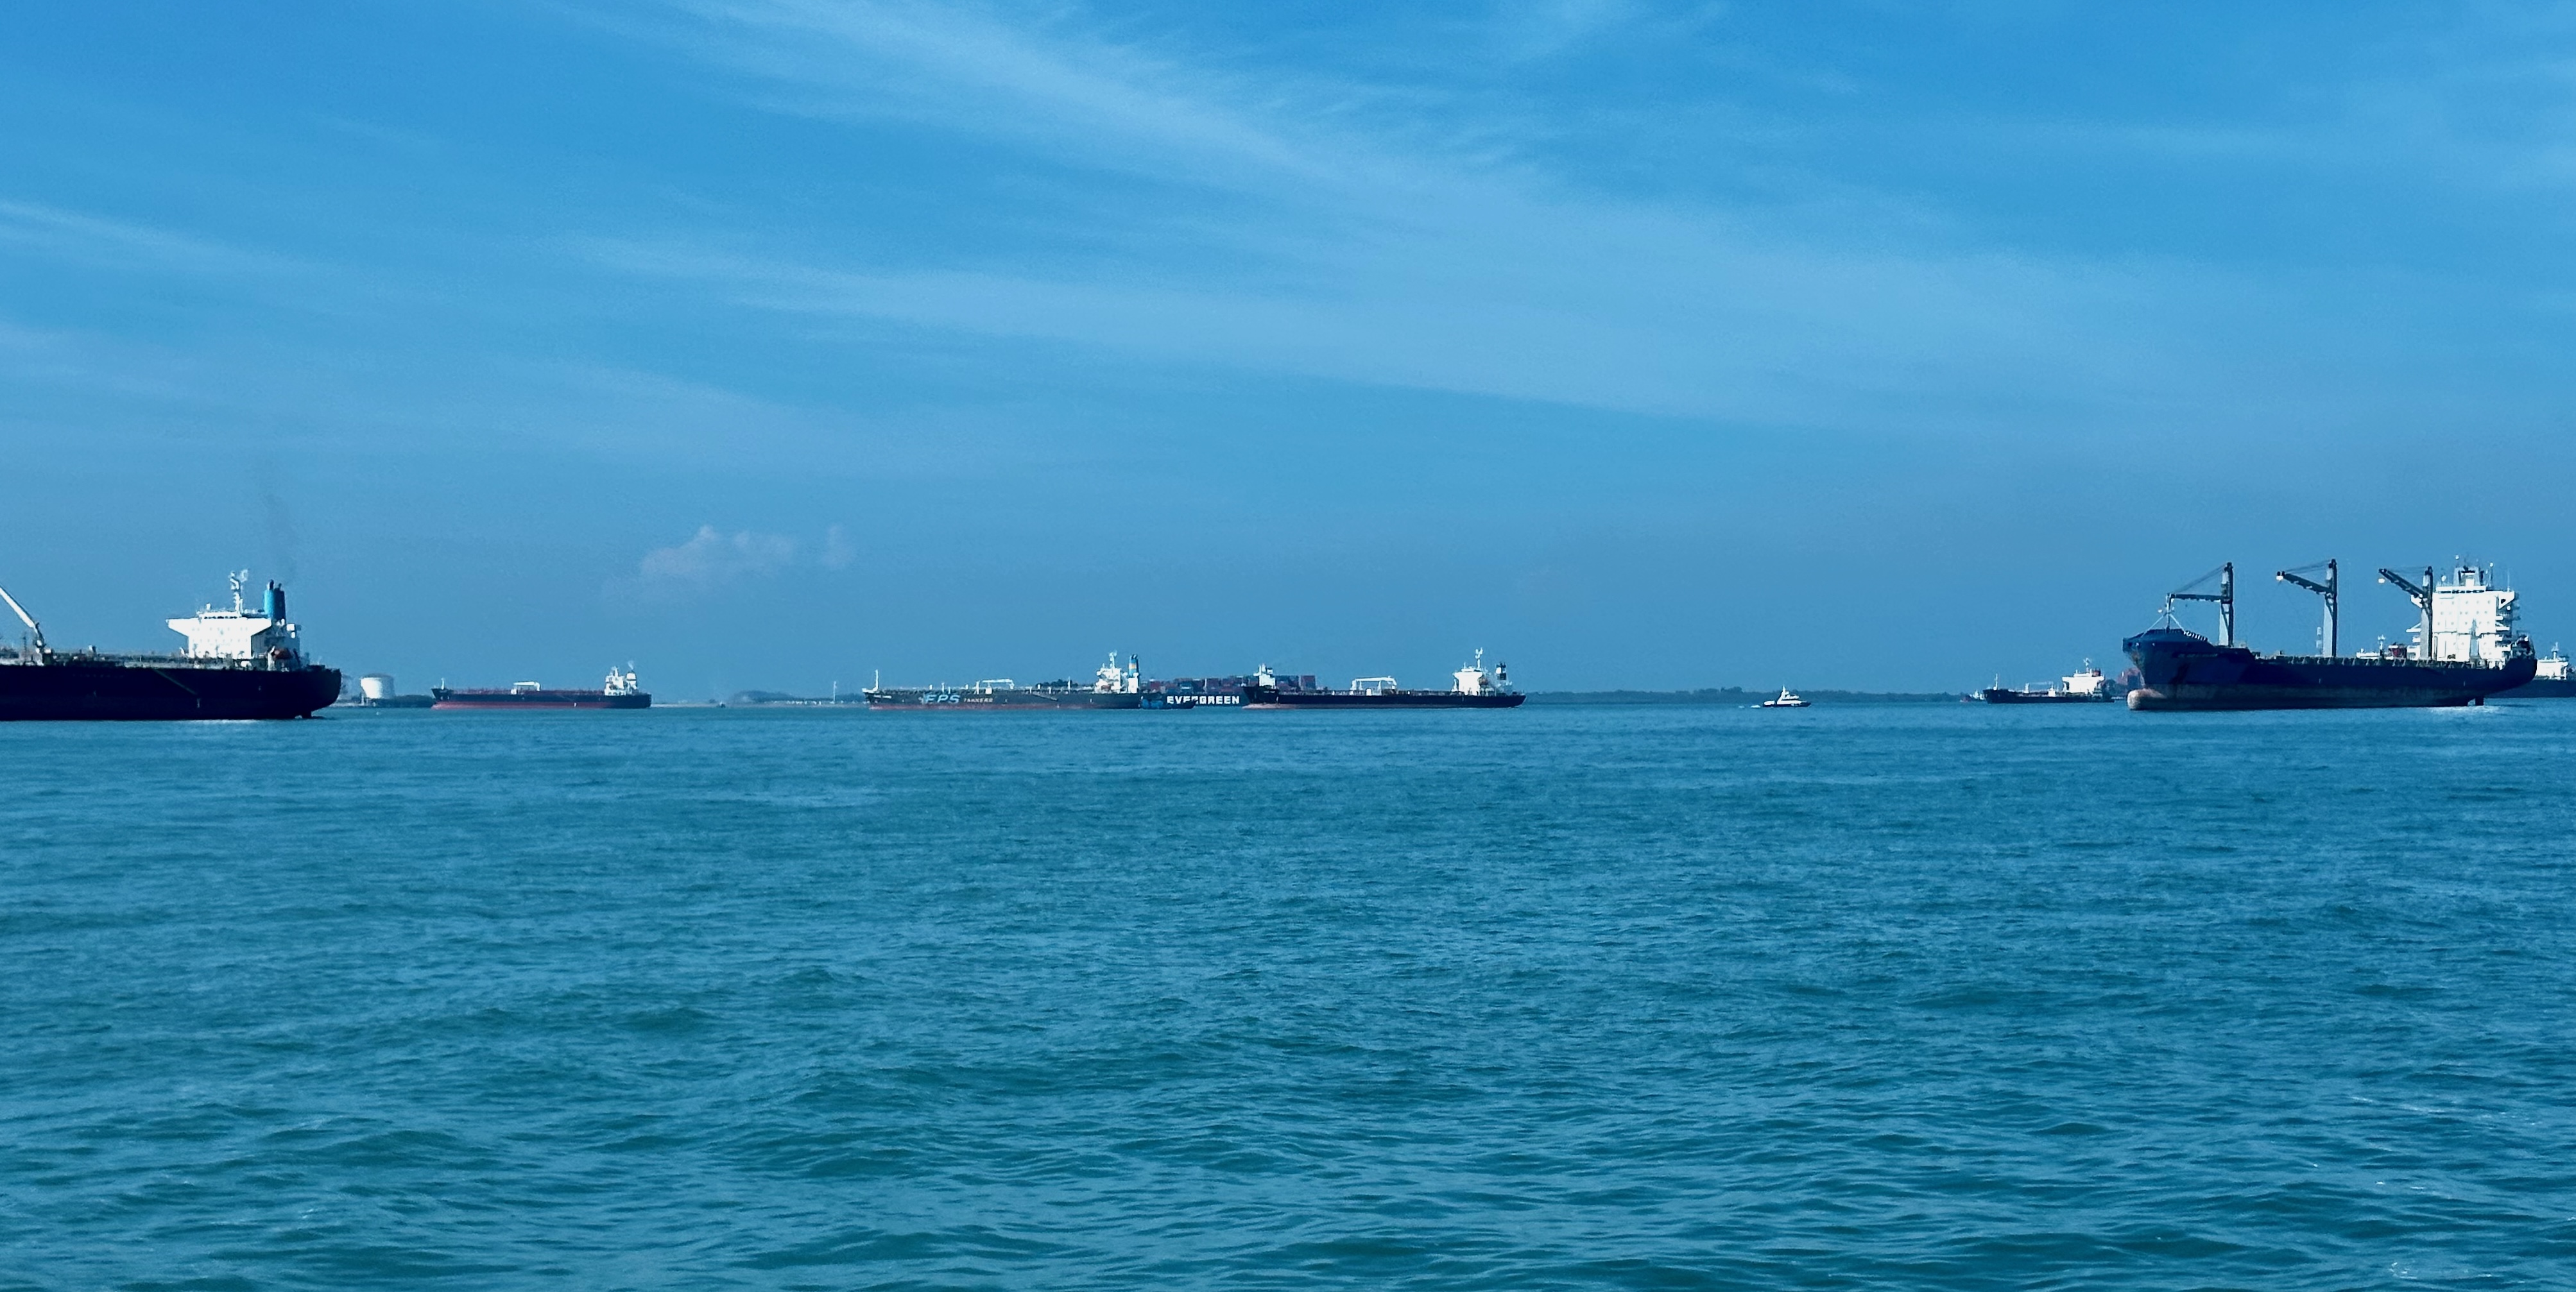 Ships idling offshore between Singapore and Batam, Indonesia